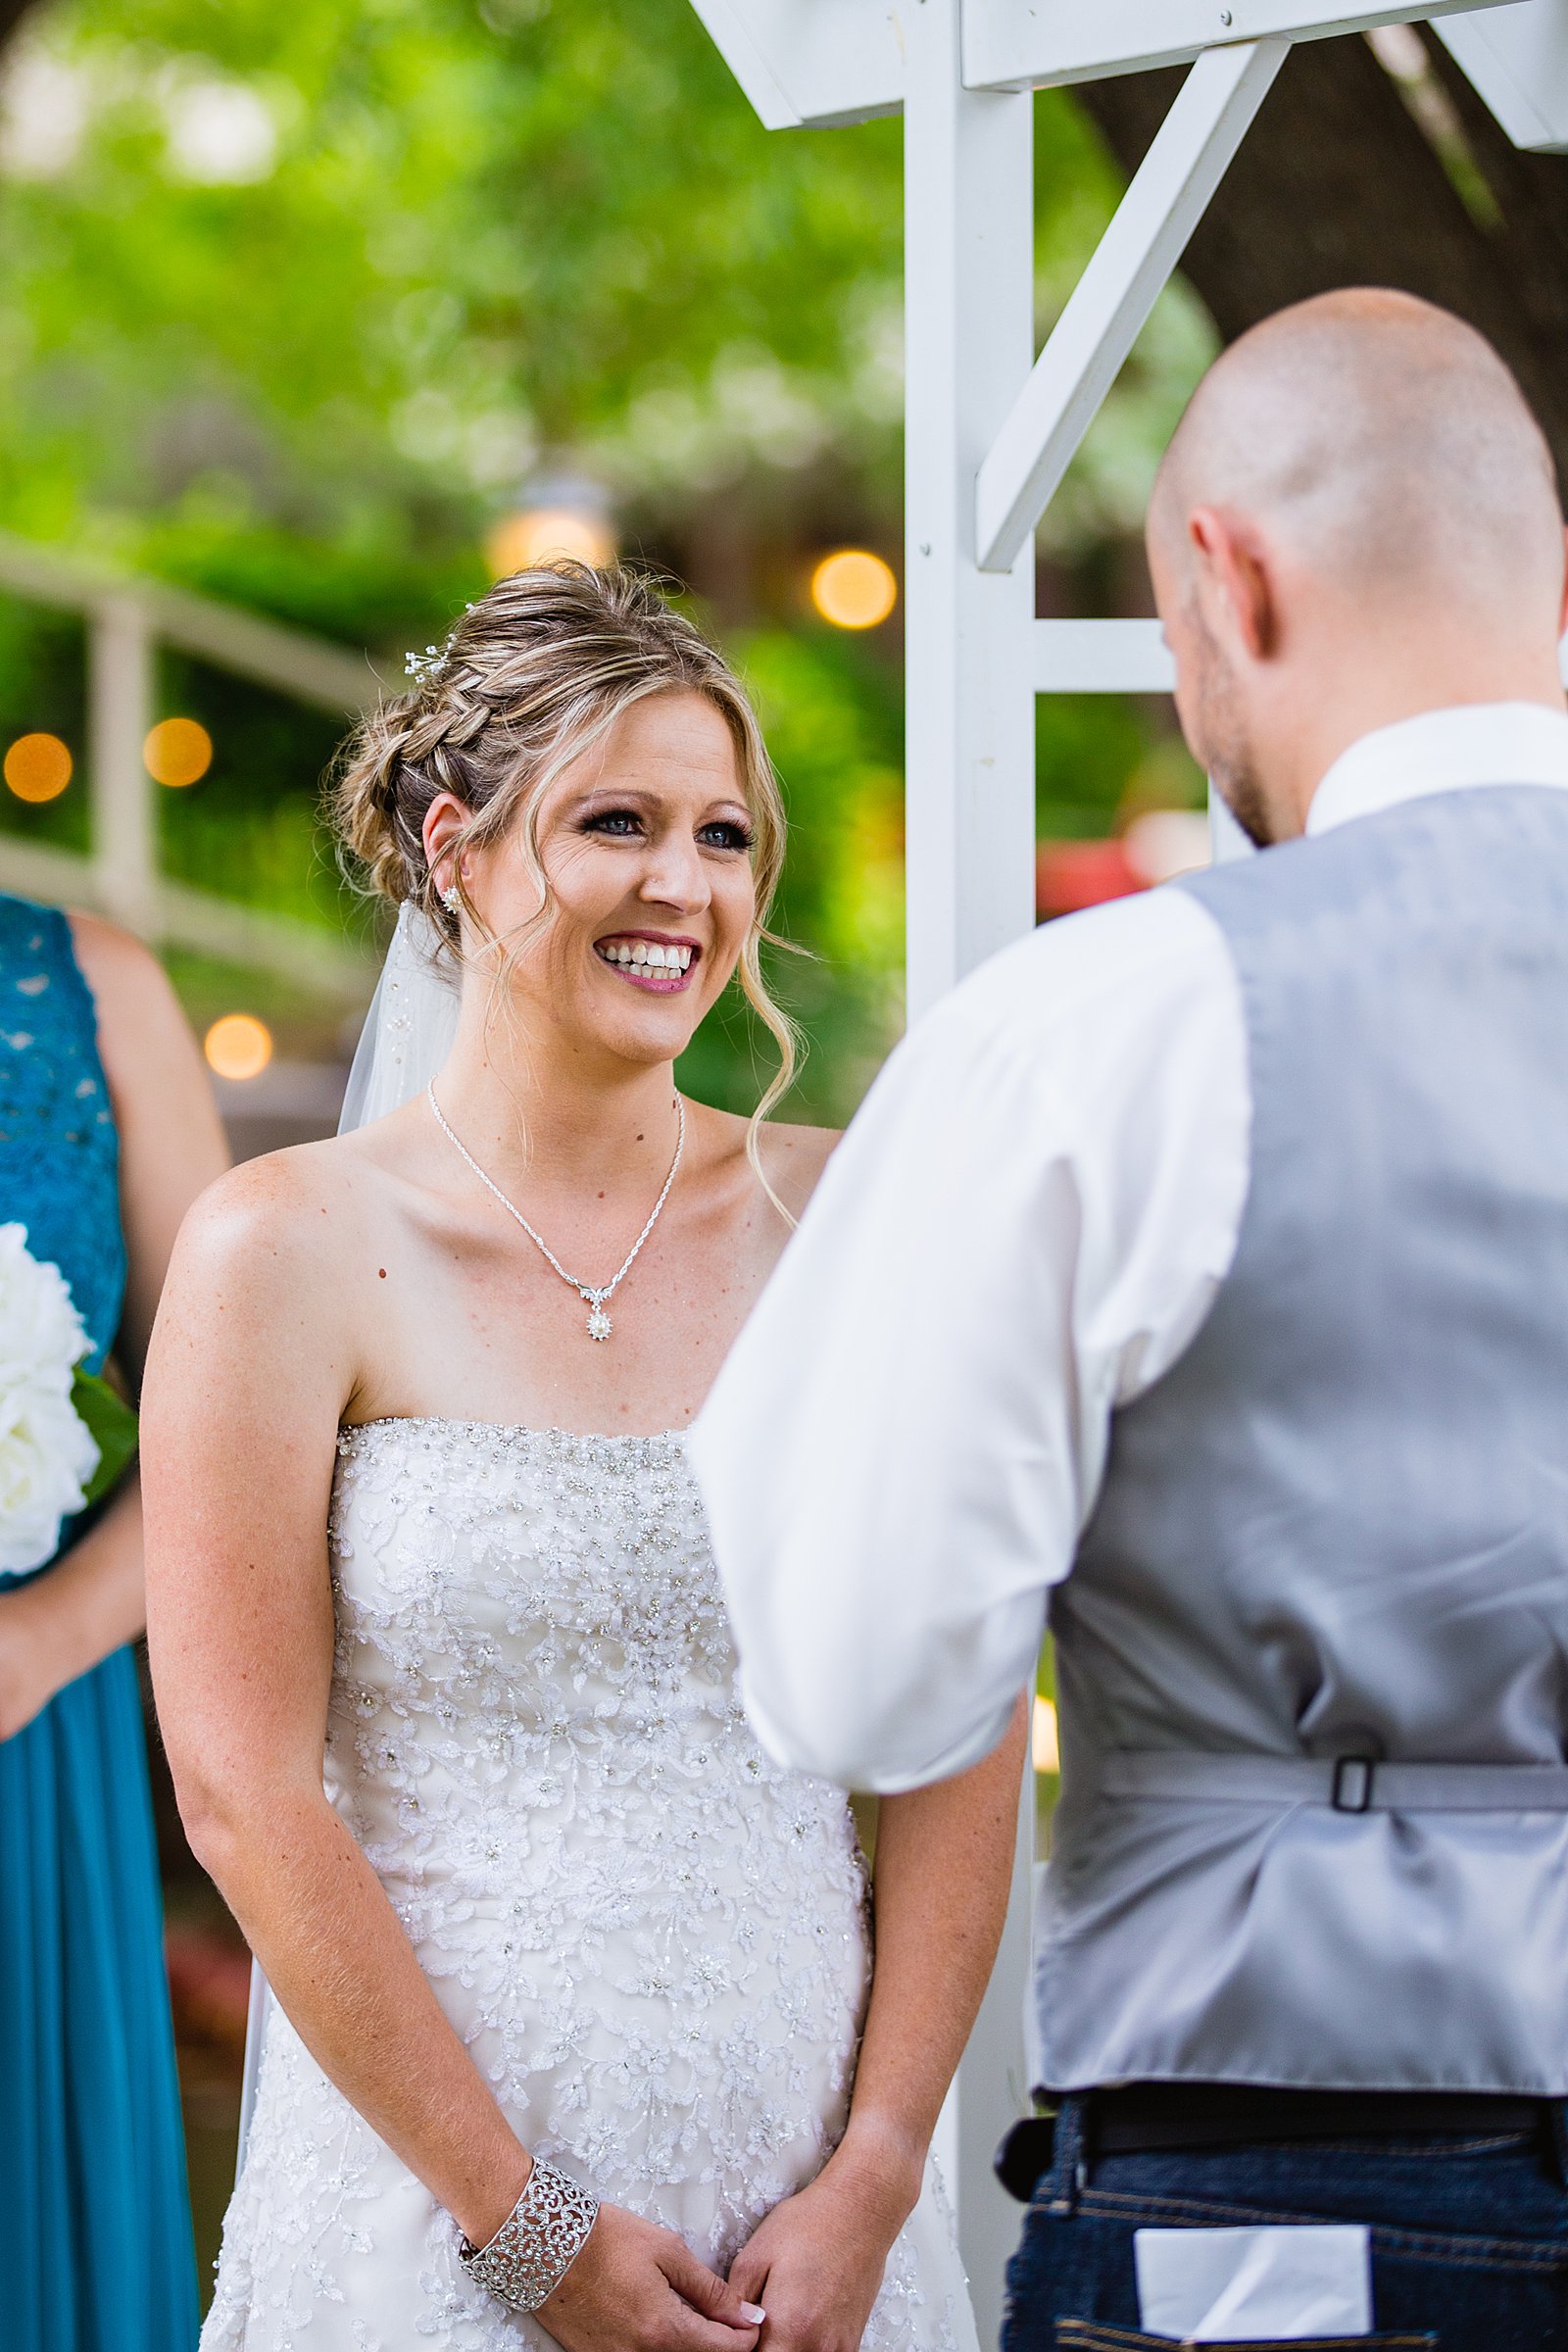 Bride looking at her groom during their wedding ceremony at The Windmill House by Chino Valley wedding photographer PMA Photography.